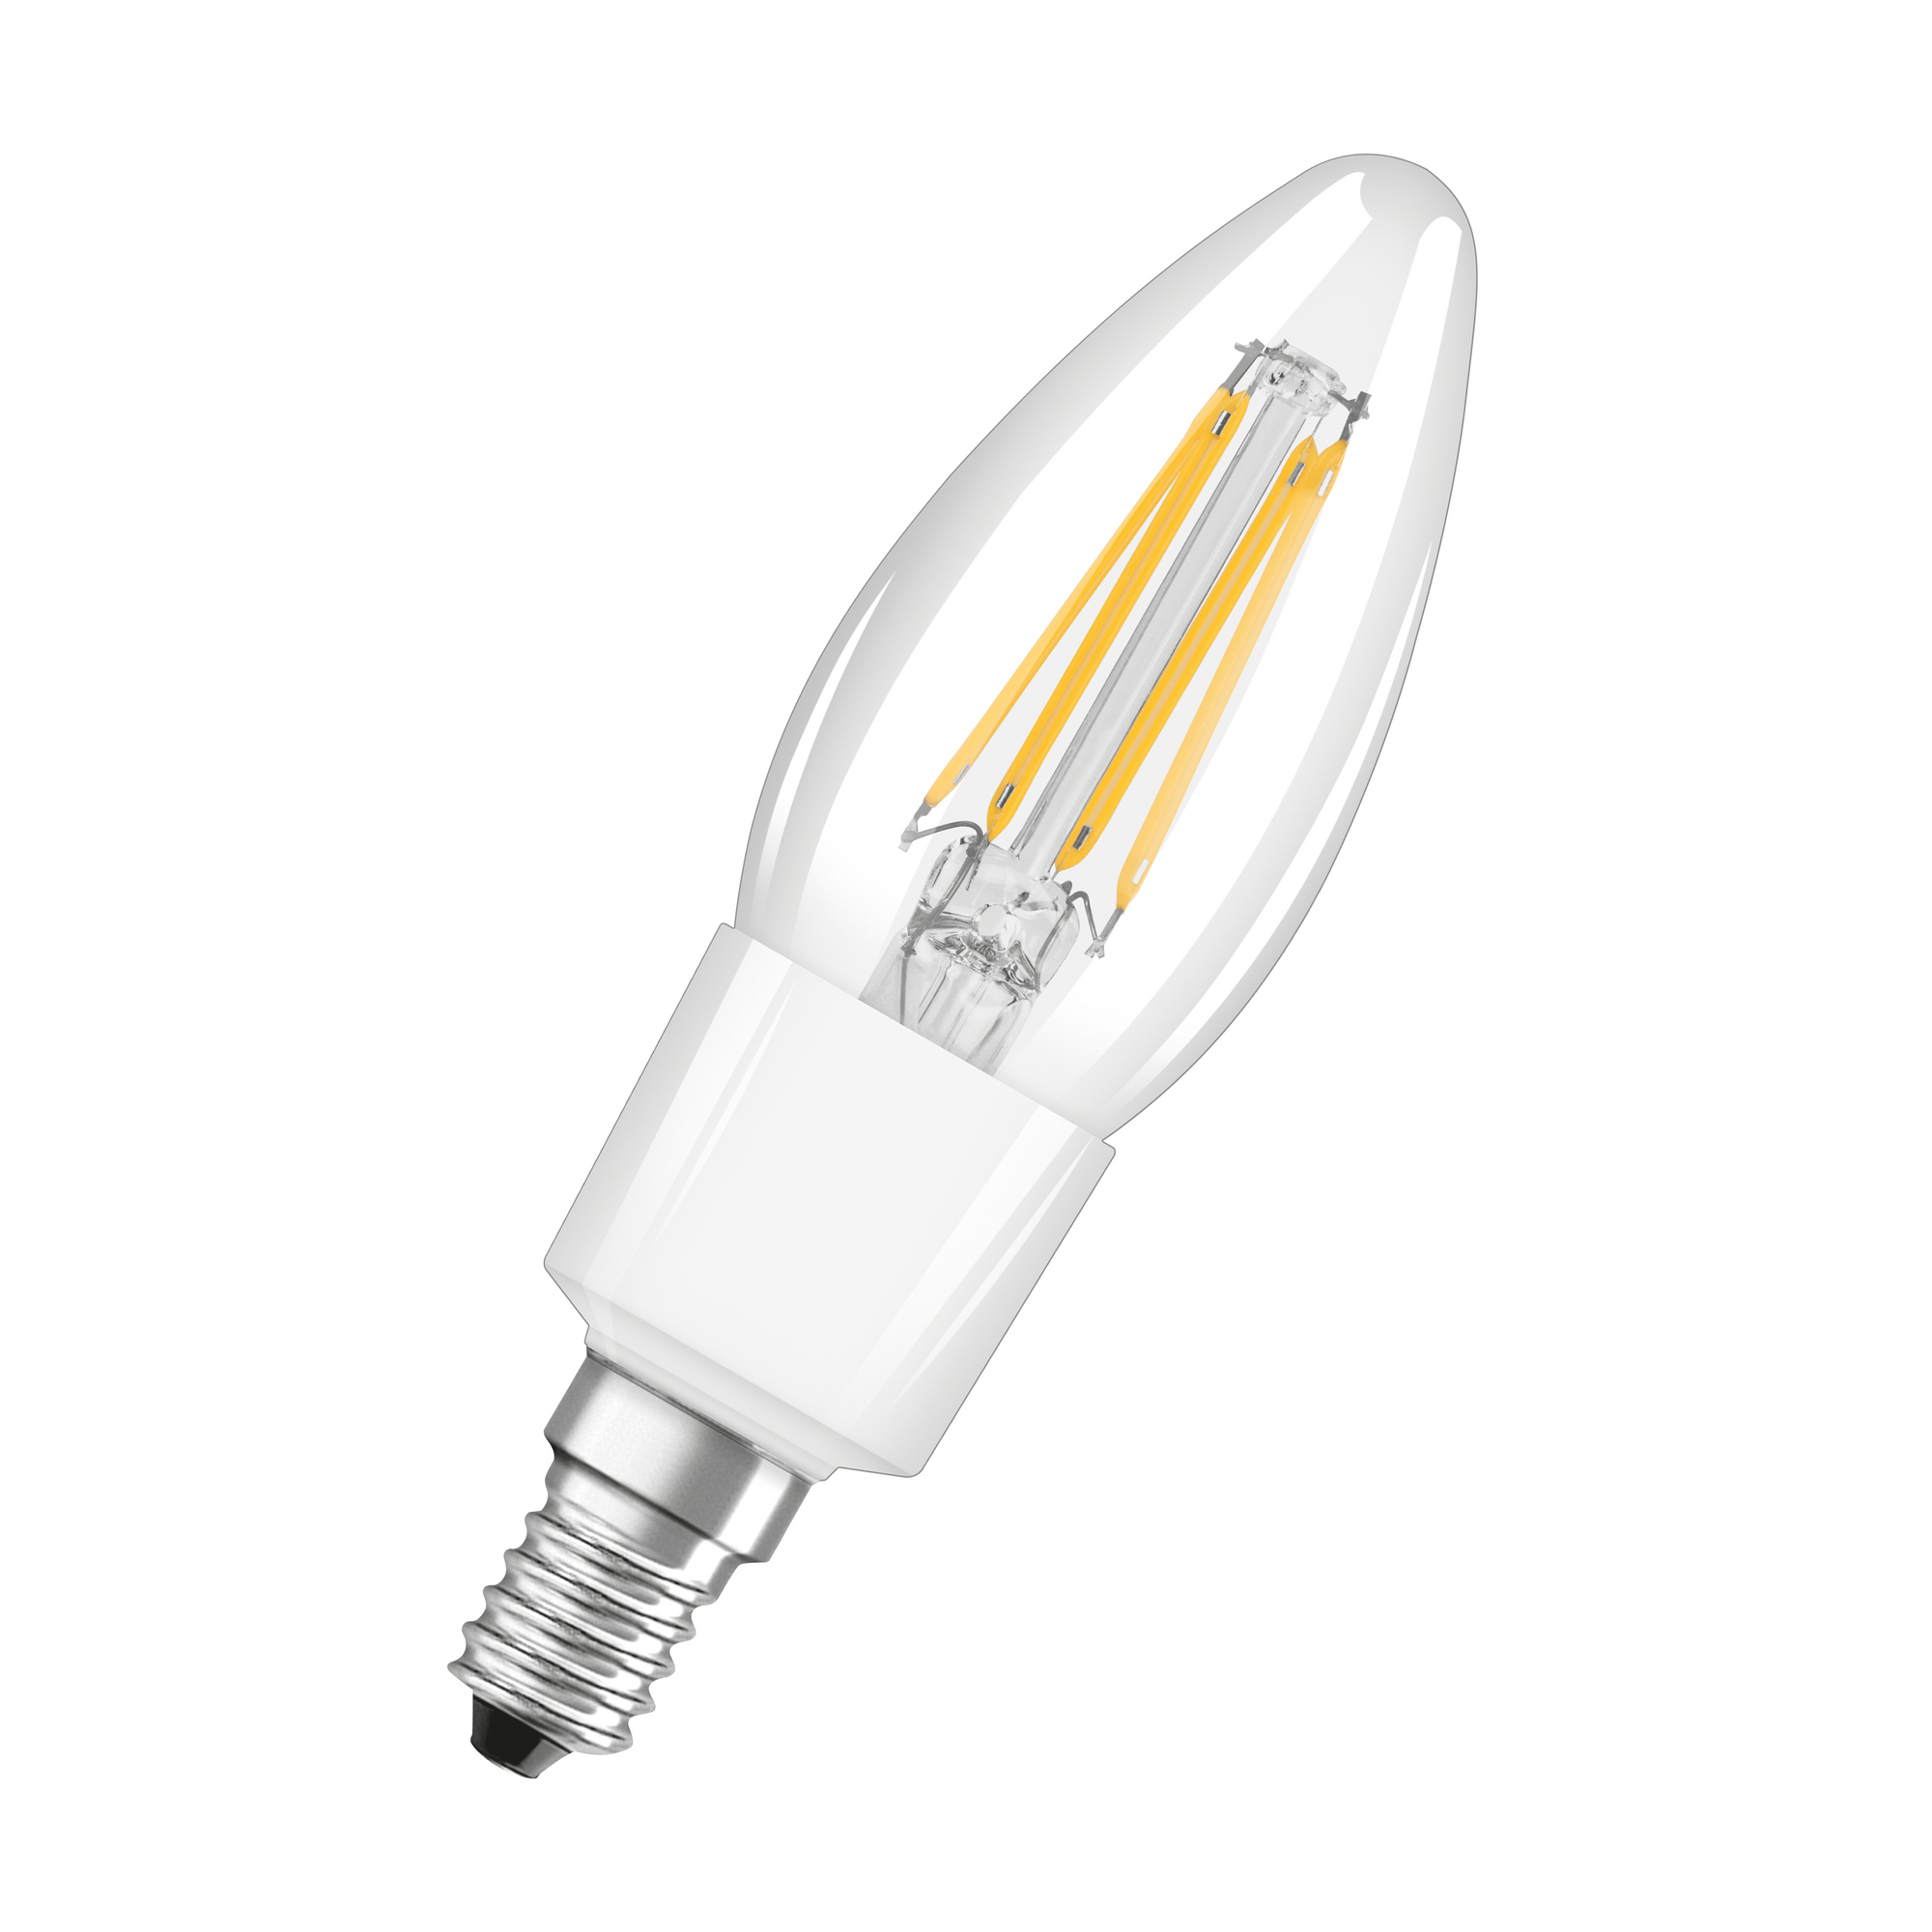 LED-Lampe 'Smart+' 11,8 cm 470 lm 4 W E14 weiß Bluetooth dimmbar + product picture